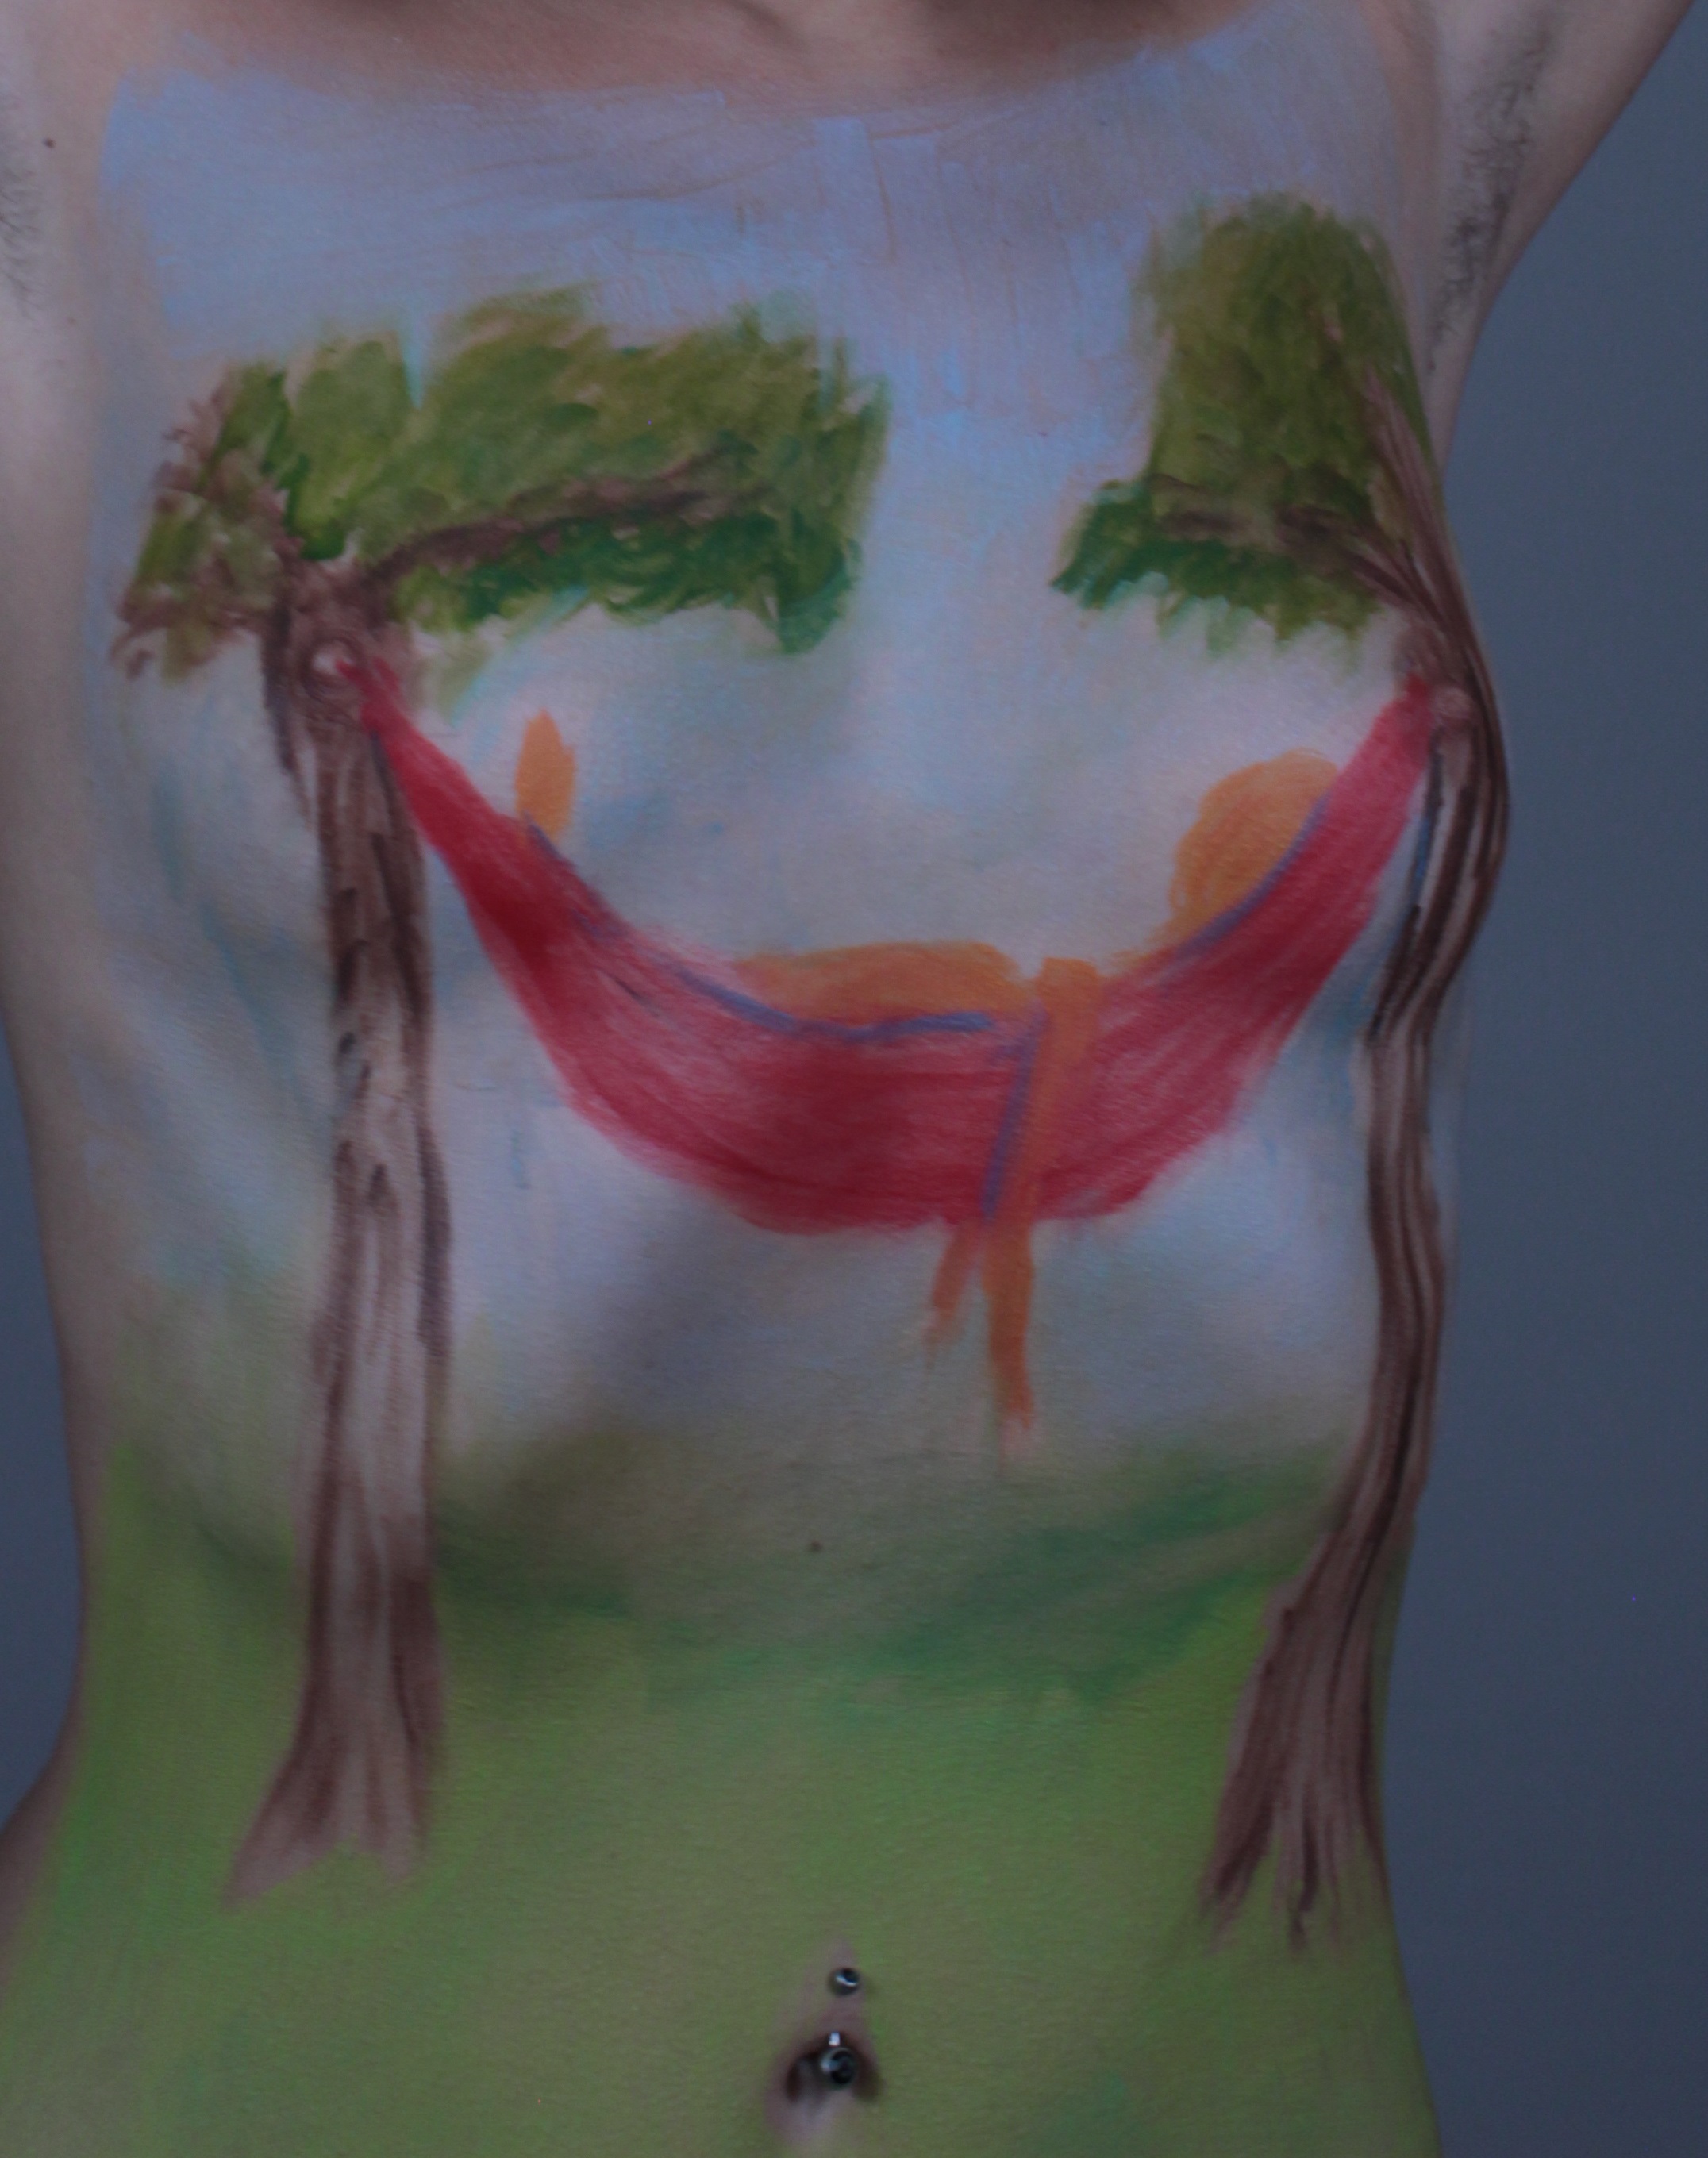 painting of person resting in hammock between two trees on woman's torso